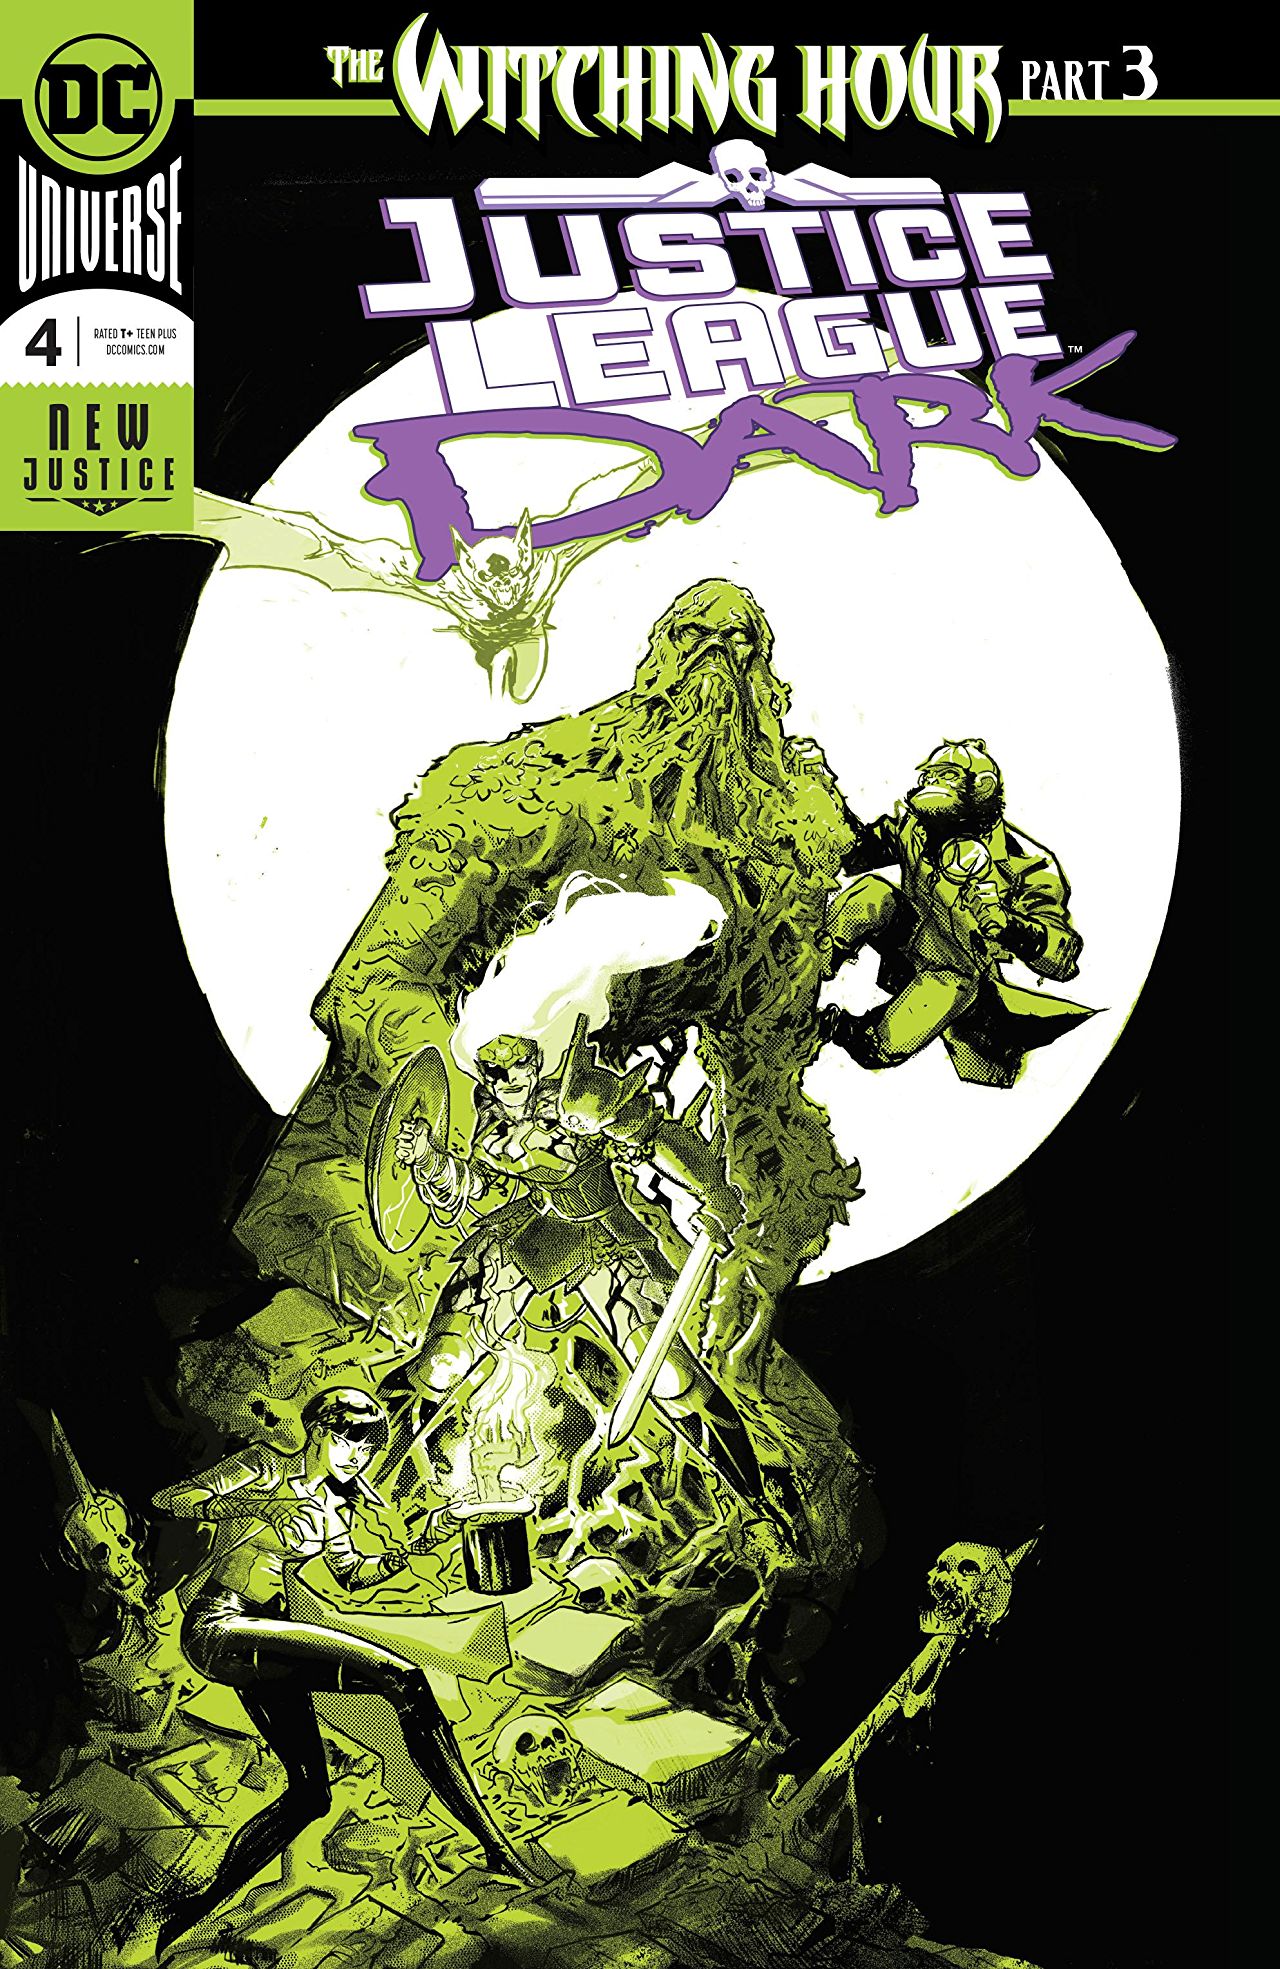 Justice League Dark #4 Review: Things falling into place